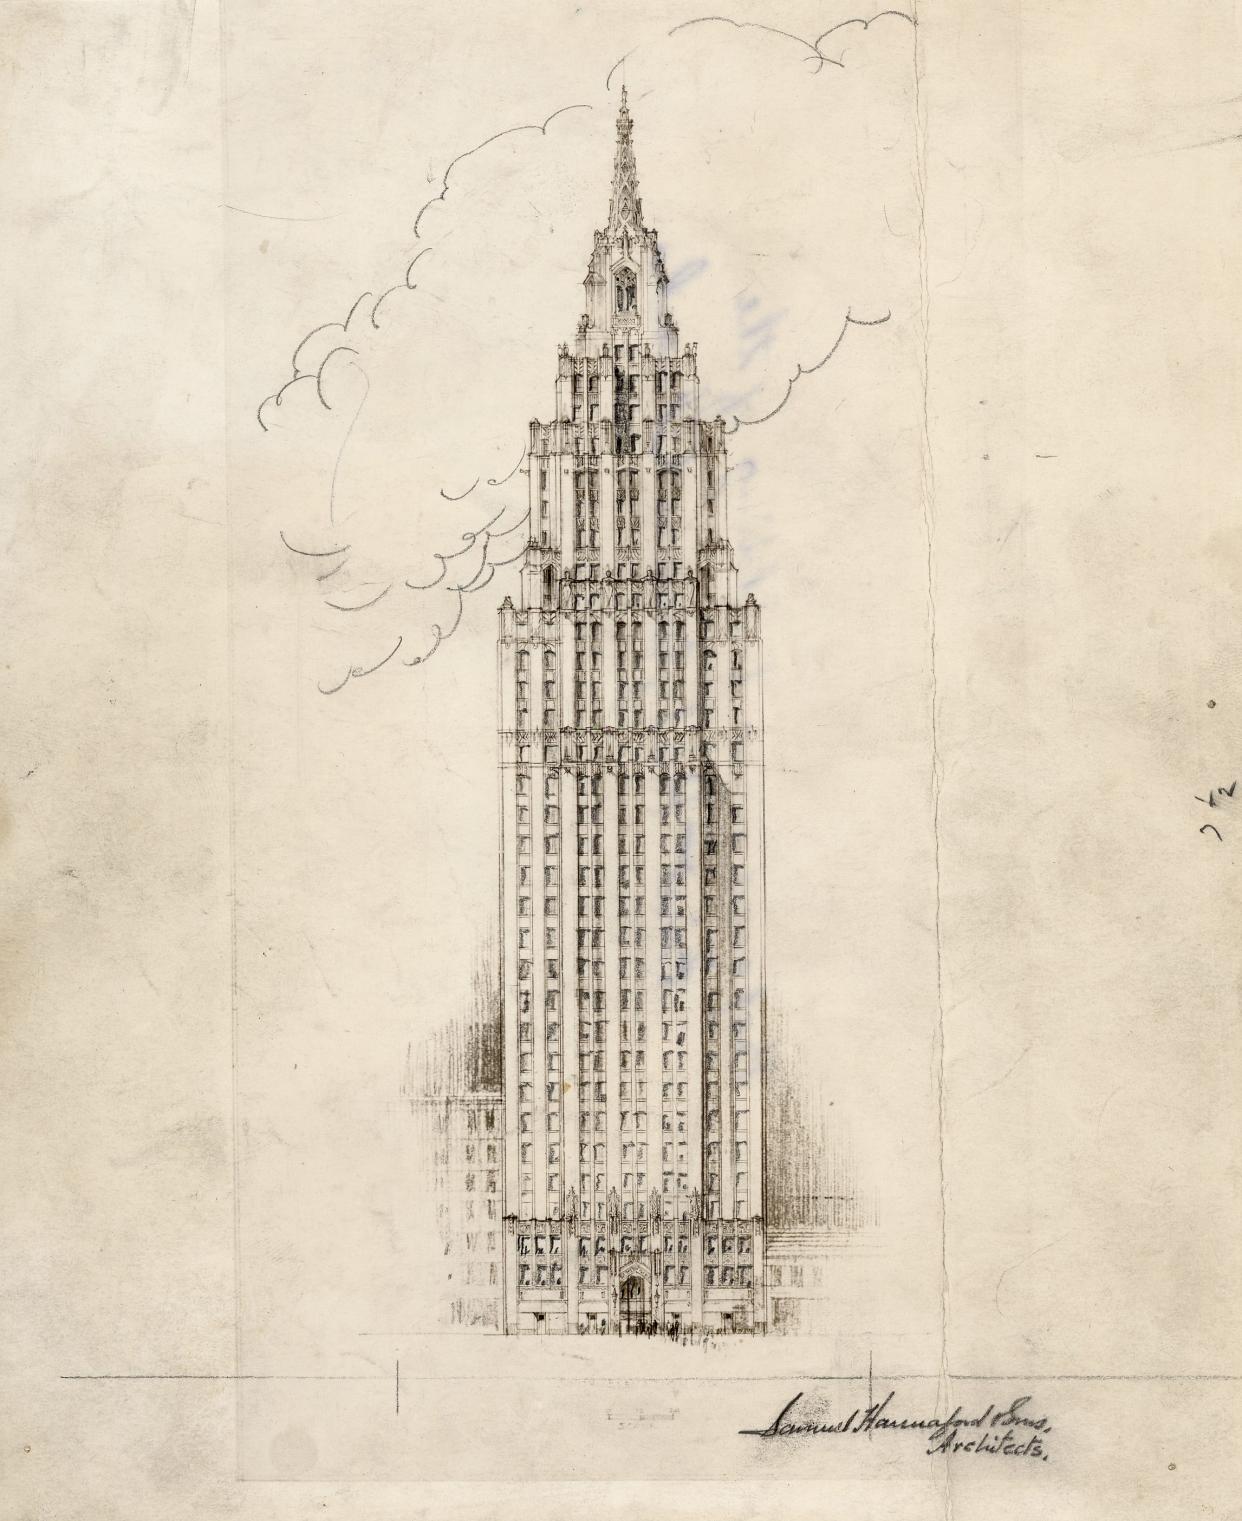 Samuel Hannaford & Sons made a sketch of Temple Tower, a proposed skyscraper that would have replaced the First Presbyterian Church on Fourth Street.